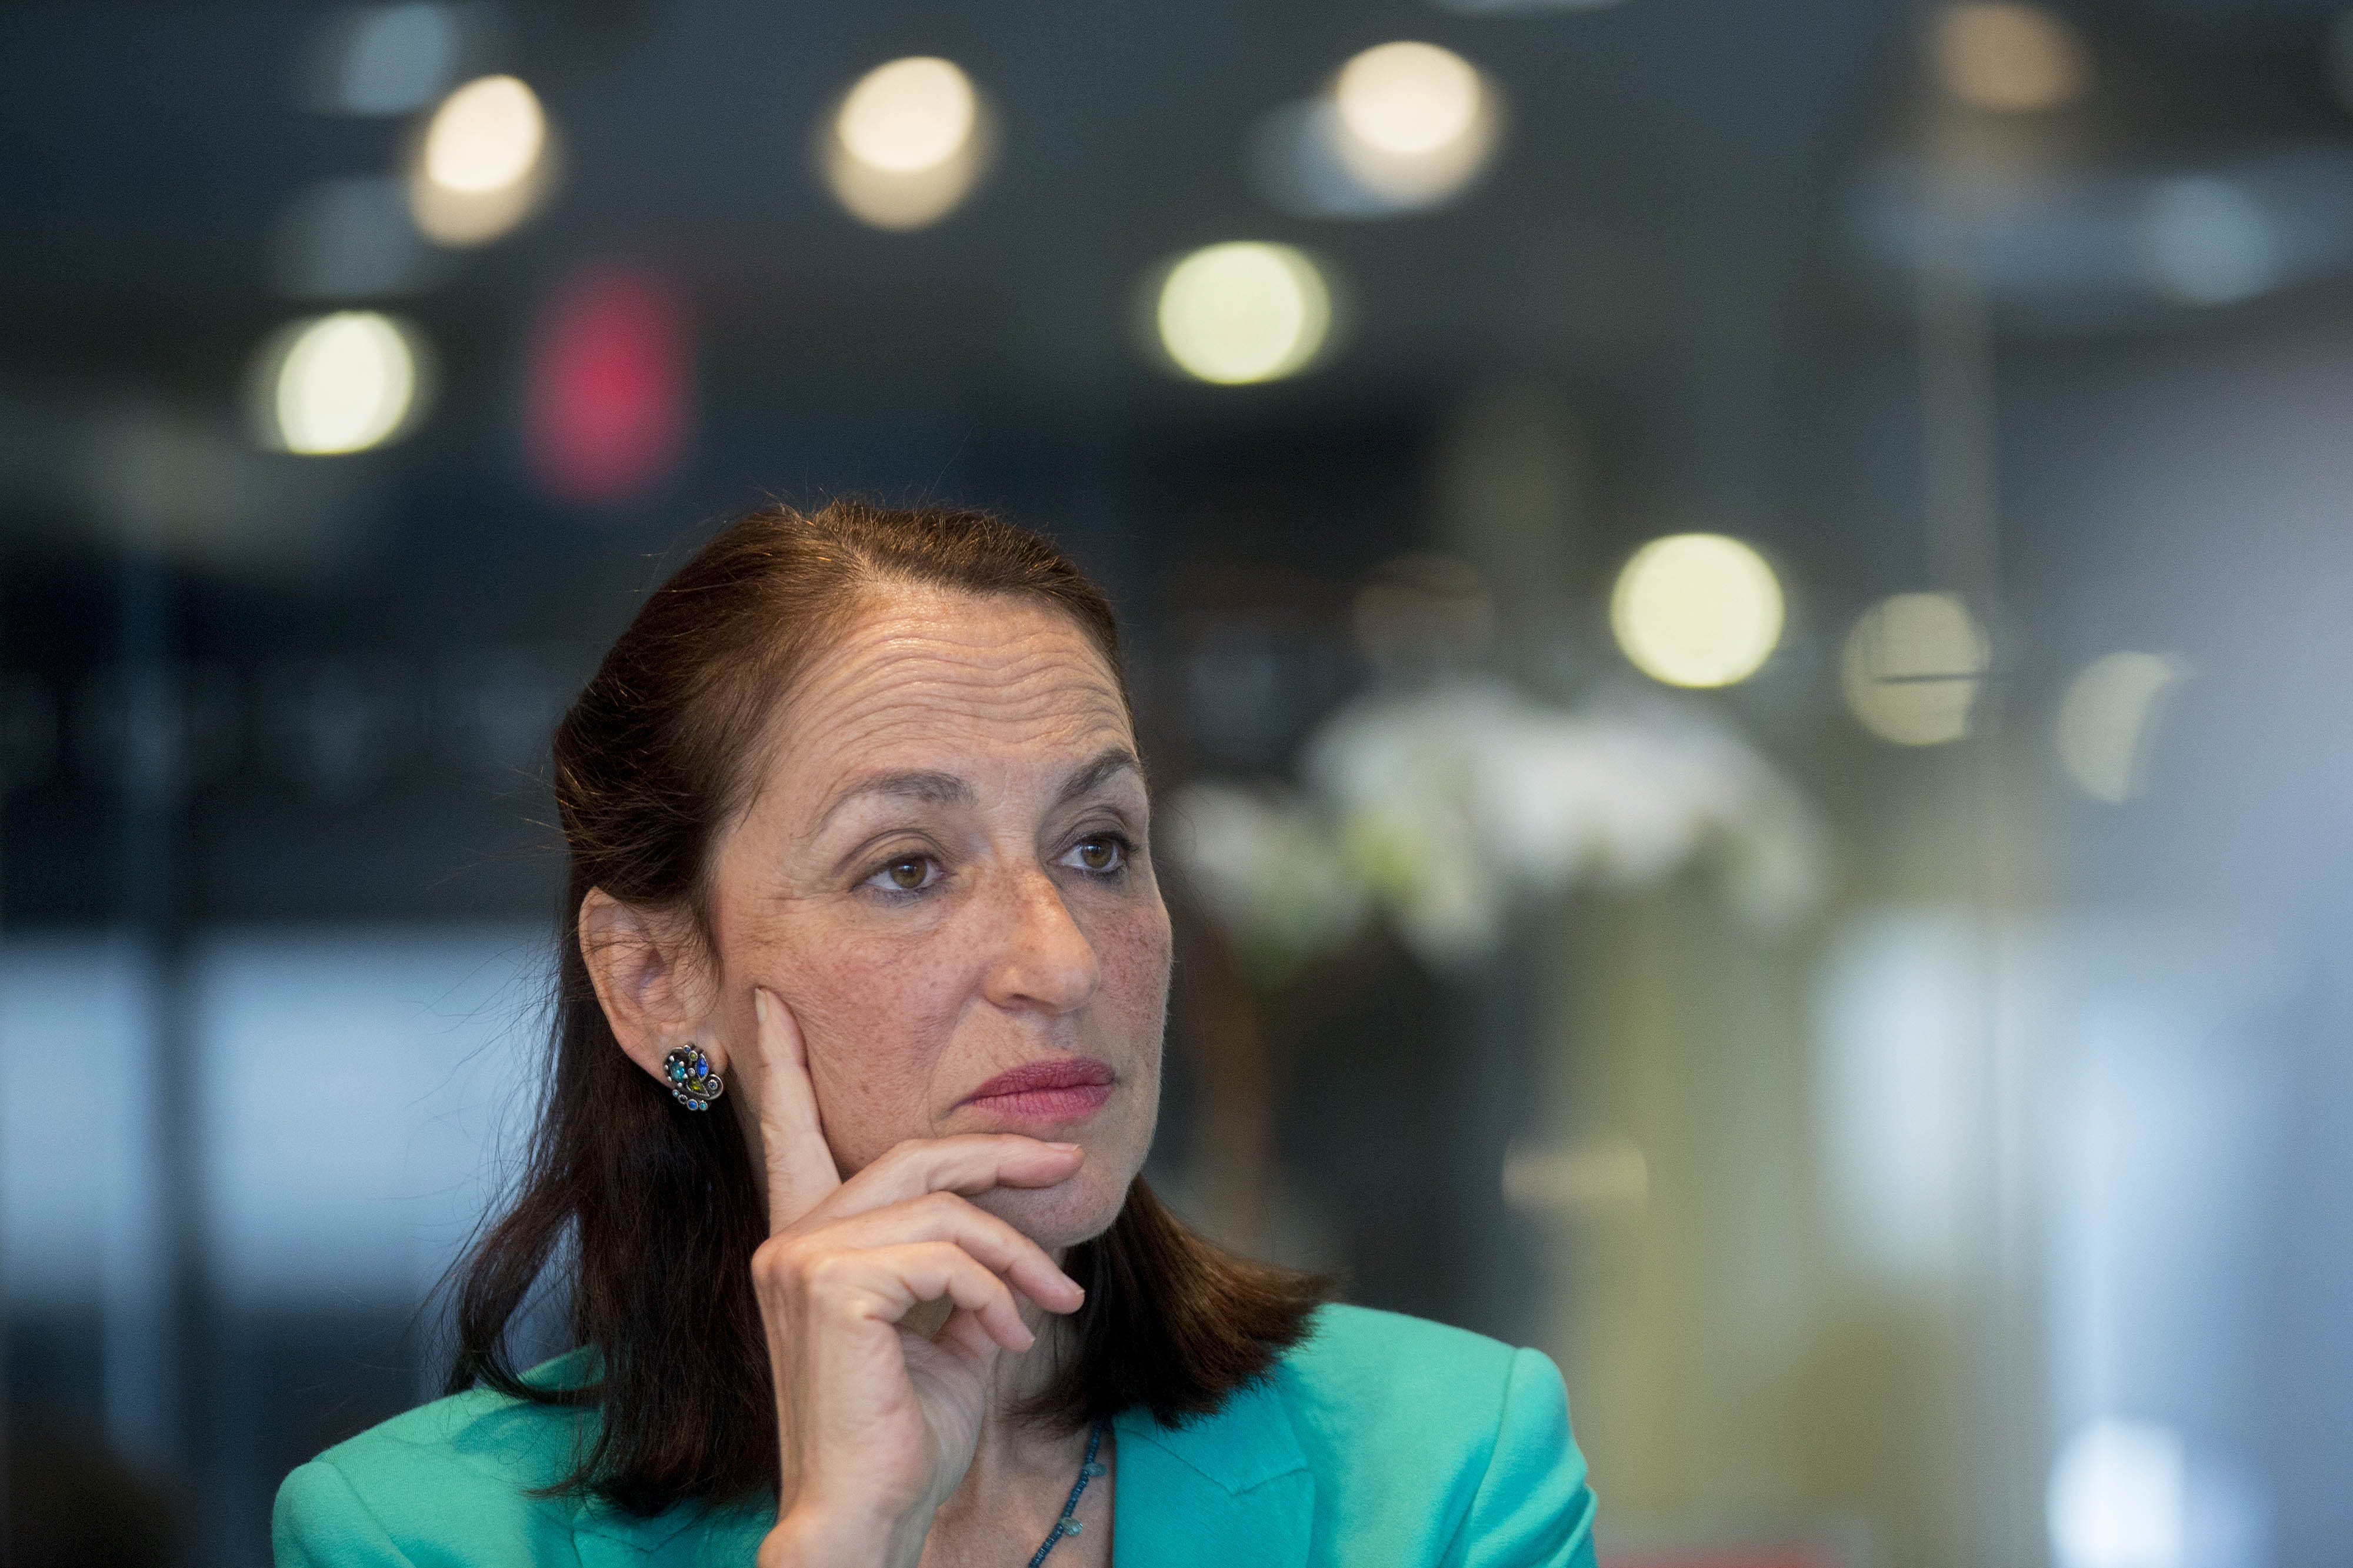 Margaret Hamburg, commissioner of the Food and Drug Administration (FDA), listens to a question during an interview in Washington, D.C. on May 28, 2014. (Andrew Harrer—Bloomberg/Getty Images)